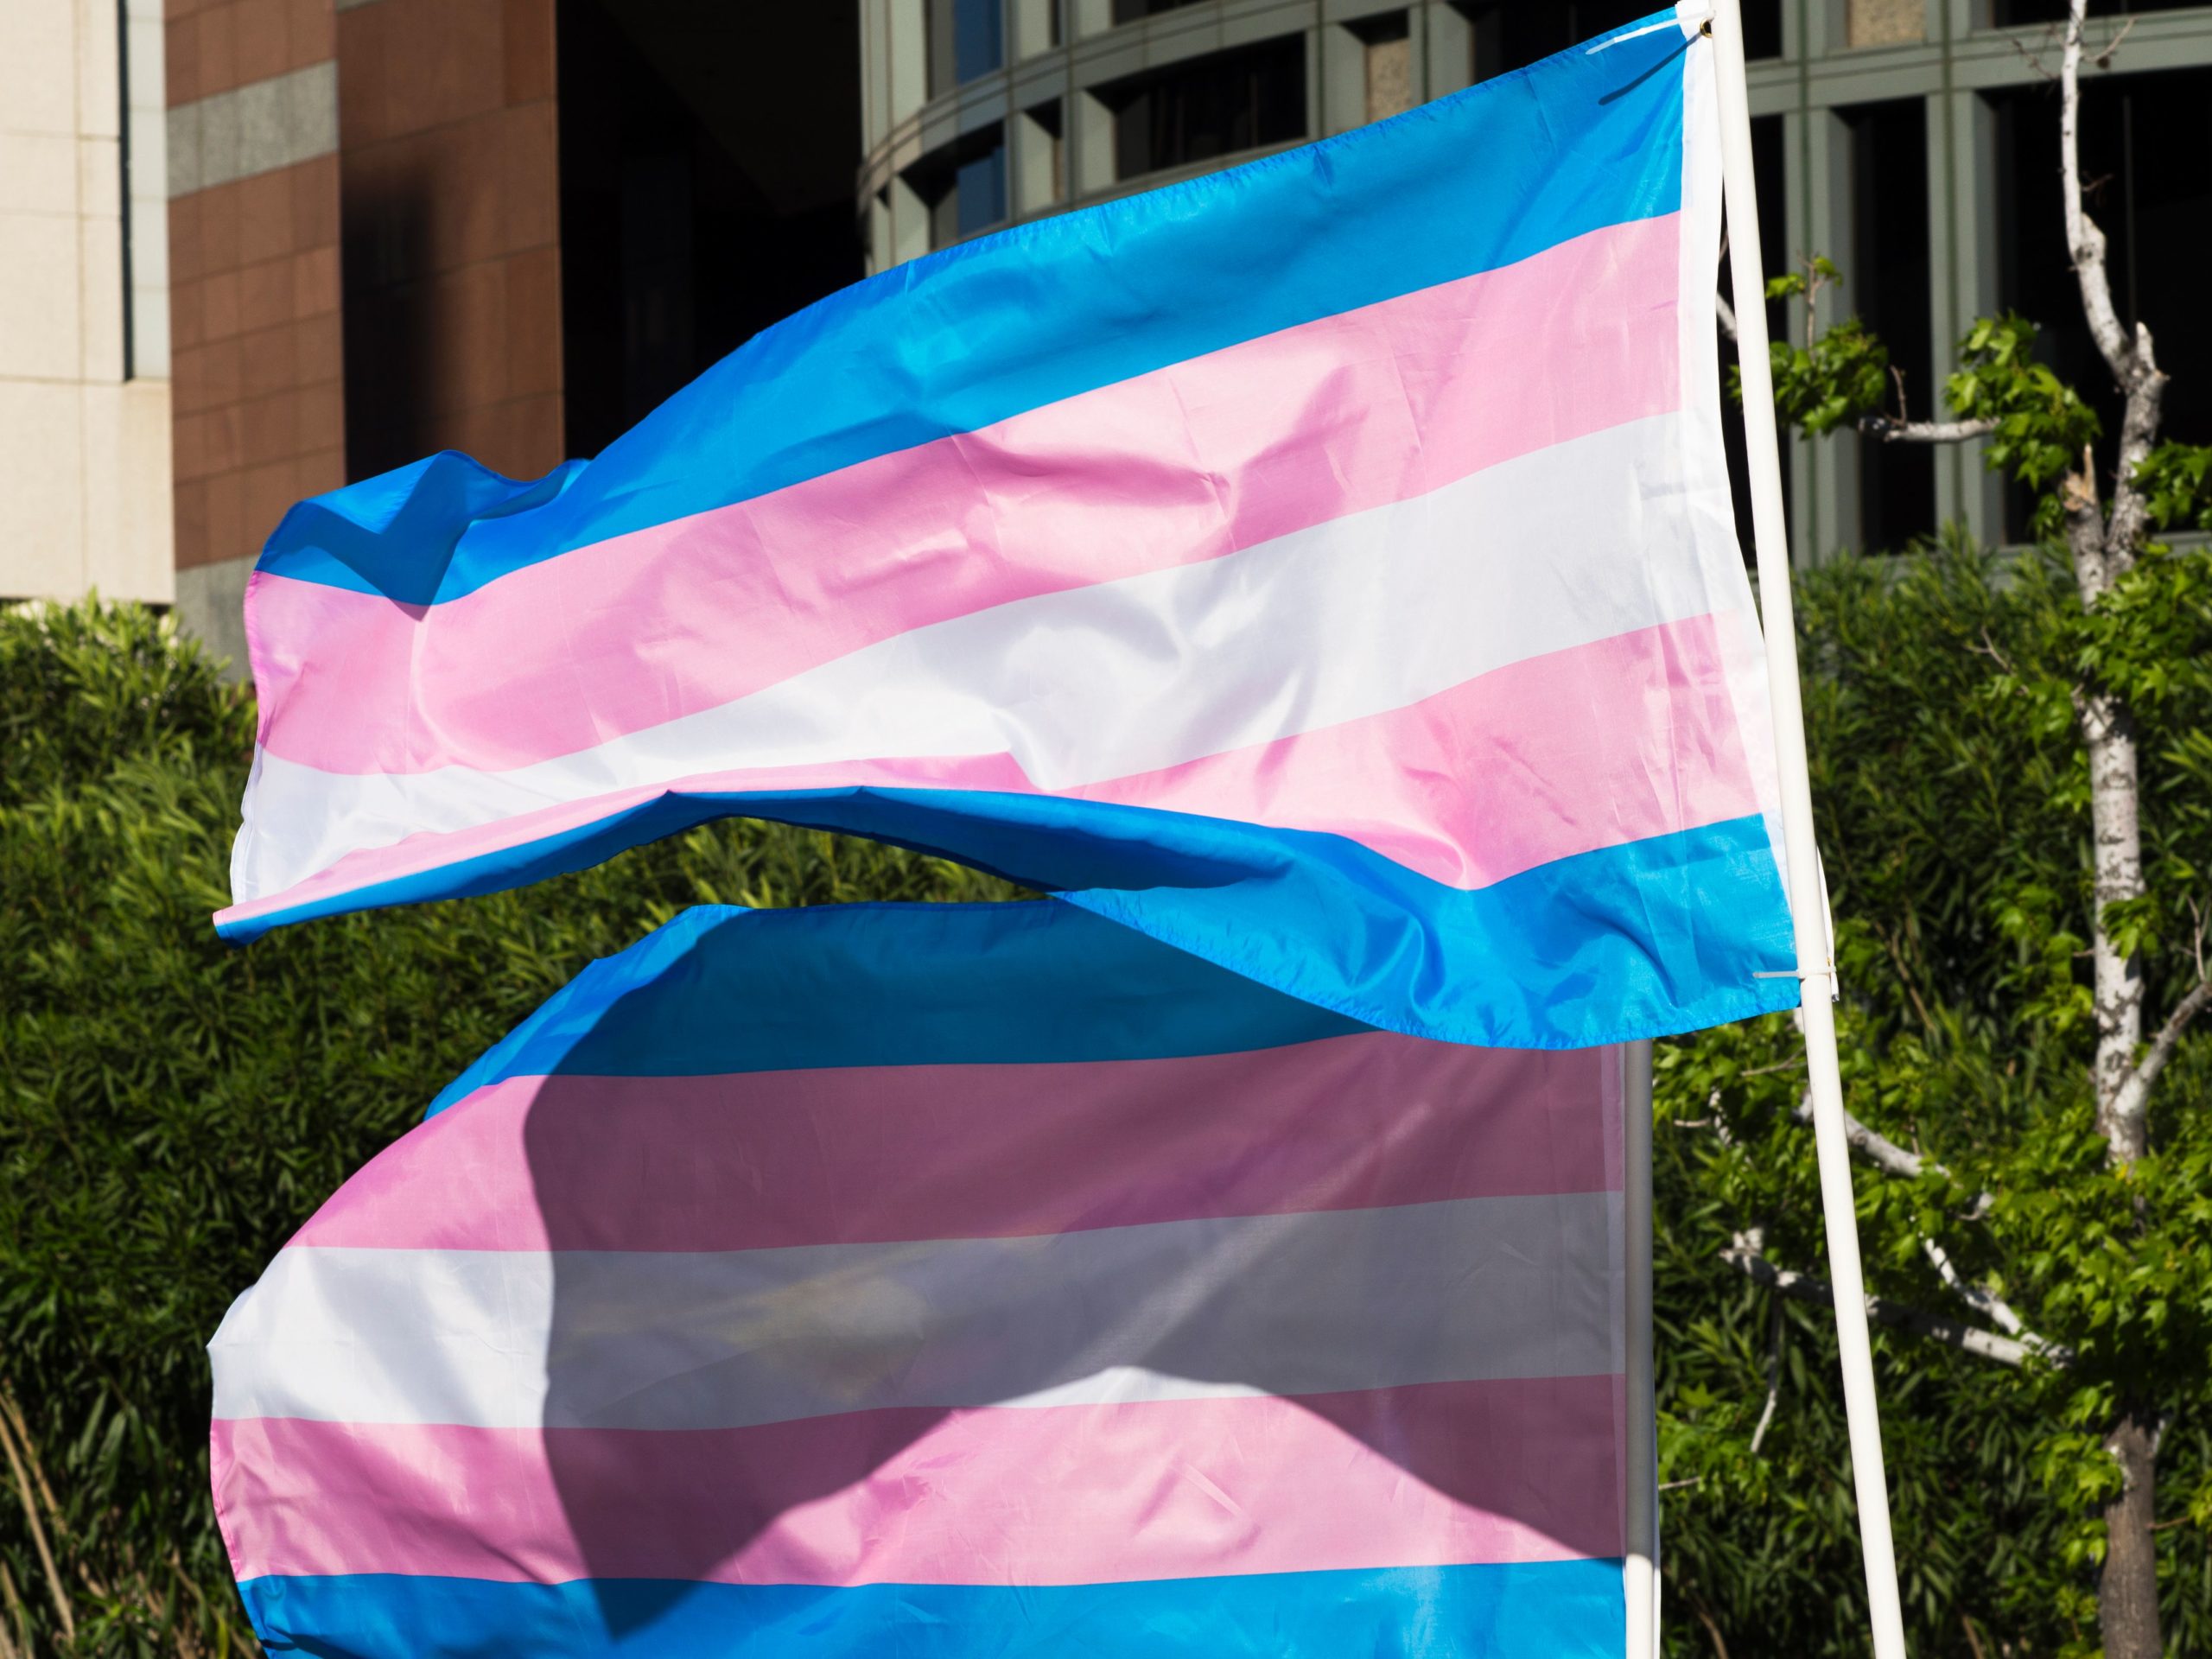 Trans pride flags flutter in the wind at a gathering to celebrate International Transgender Day of Visibility, March 31, 2017 at the Edward R. Roybal Federal Building in Los Angeles, California. International Transgender Day of Visibility is dedicated to celebrating transgender people and raising awareness of discrimination faced by transgender people worldwide. / AFP PHOTO / Robyn Beck (Photo credit should read ROBYN BECK/AFP via Getty Images)